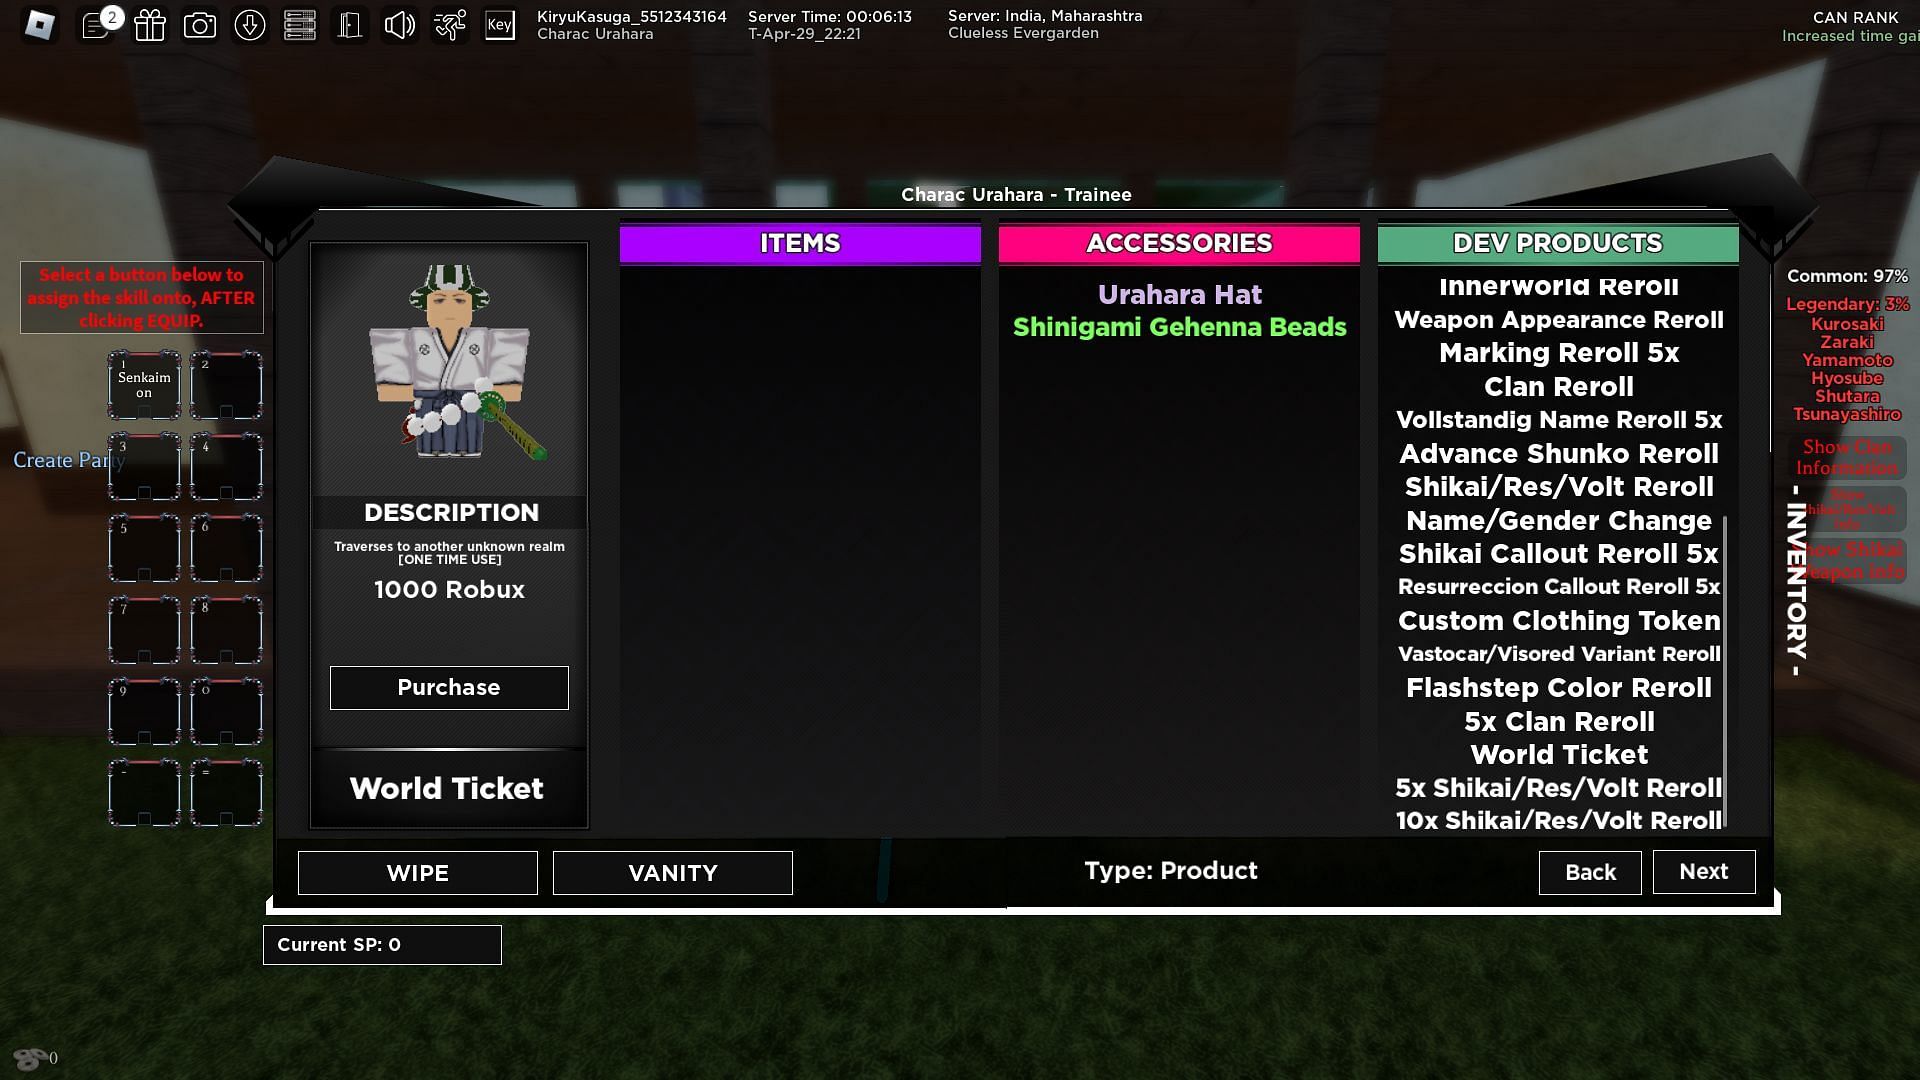 The AFK World Ticket in the Dev Products menu (Image via Roblox)